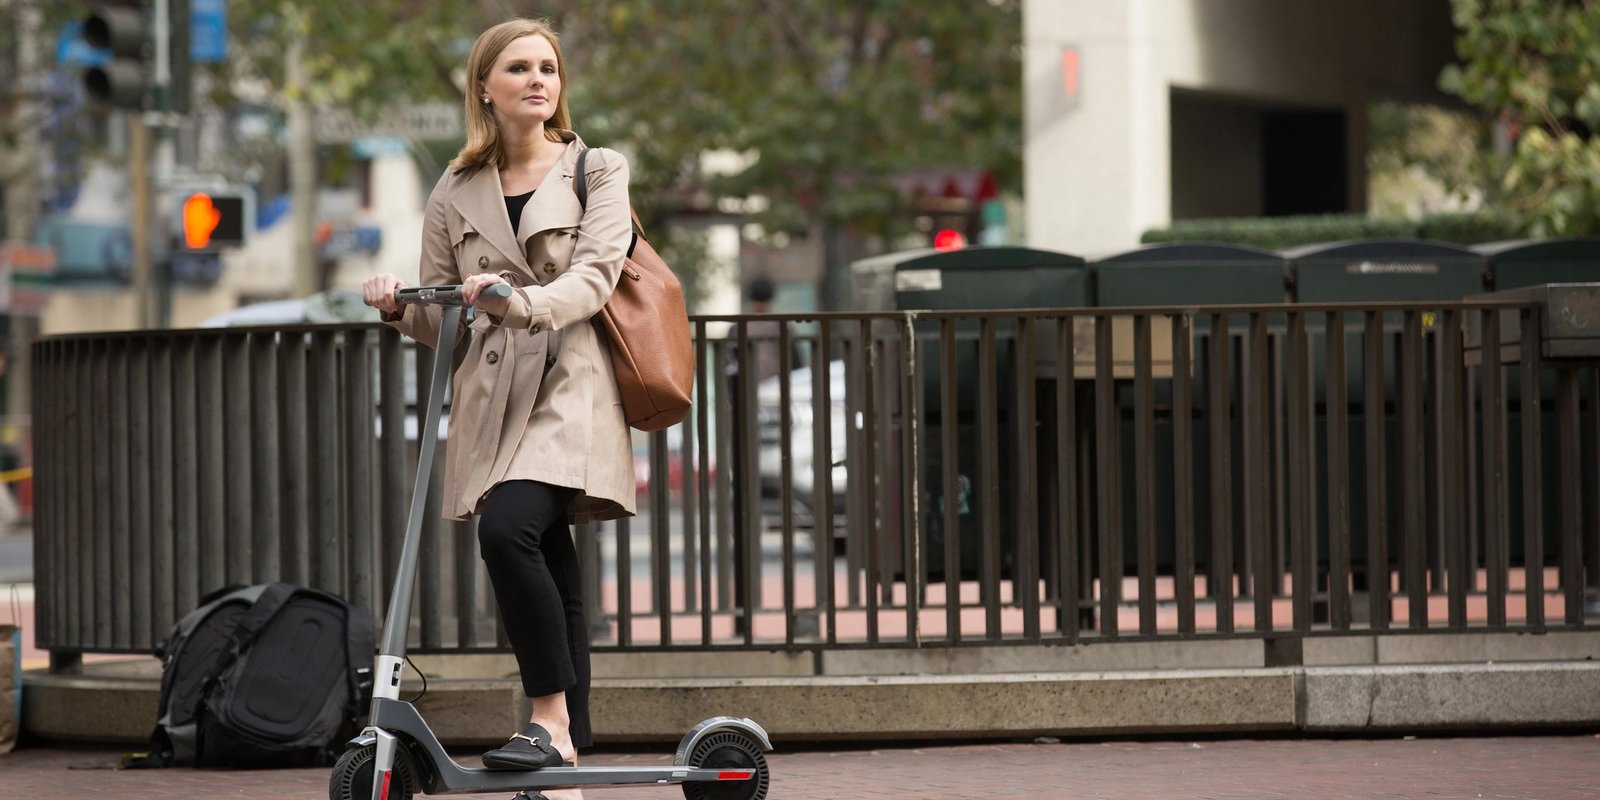 Do You Need a License to Ride an Electric Scooter?